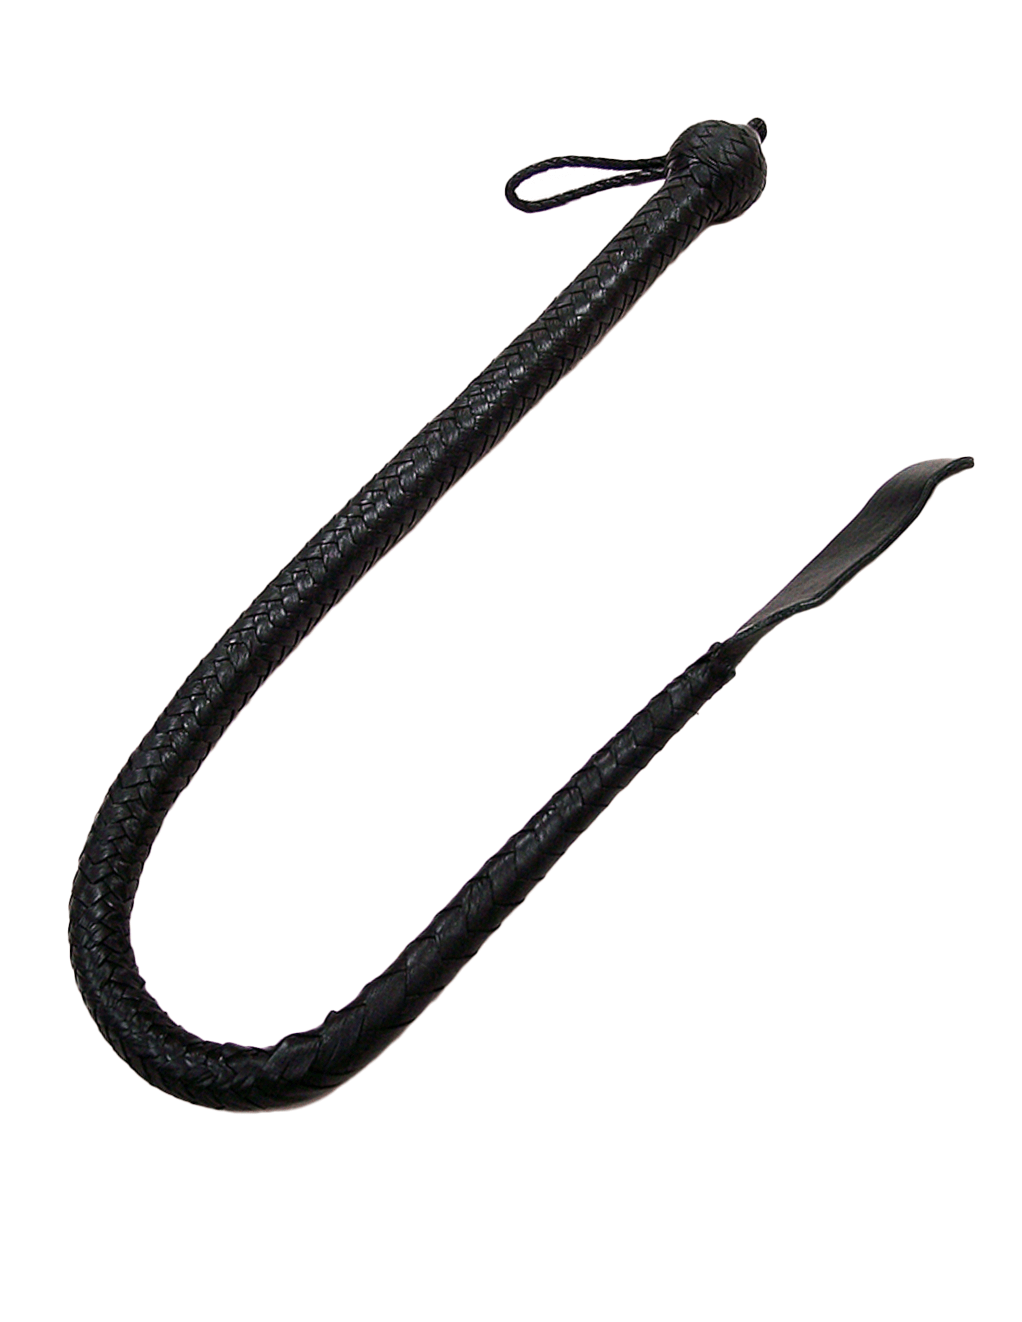 Rouge Leather Devil Tail Whip - Black - Main